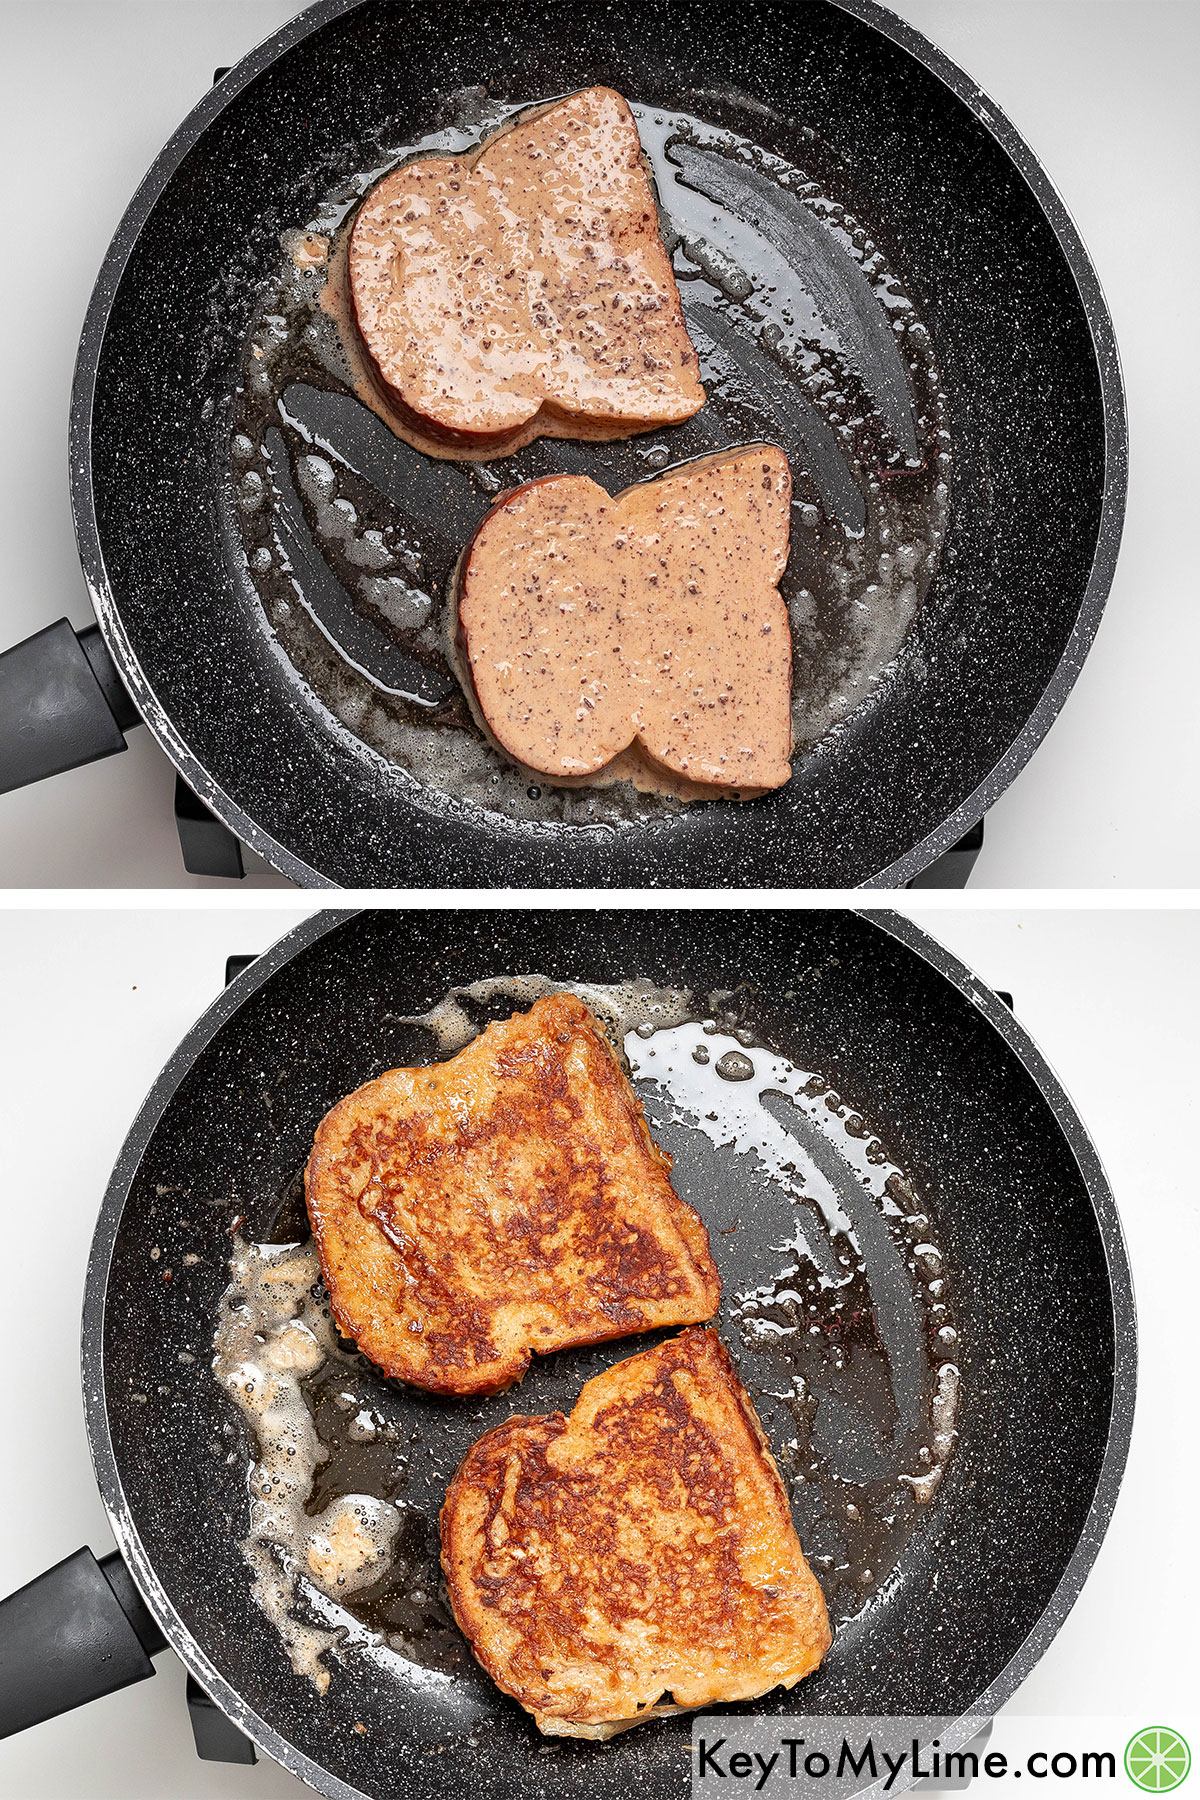 Melting butter in a skillet, and then adding the soaked bread and flipping halfway through cooking.